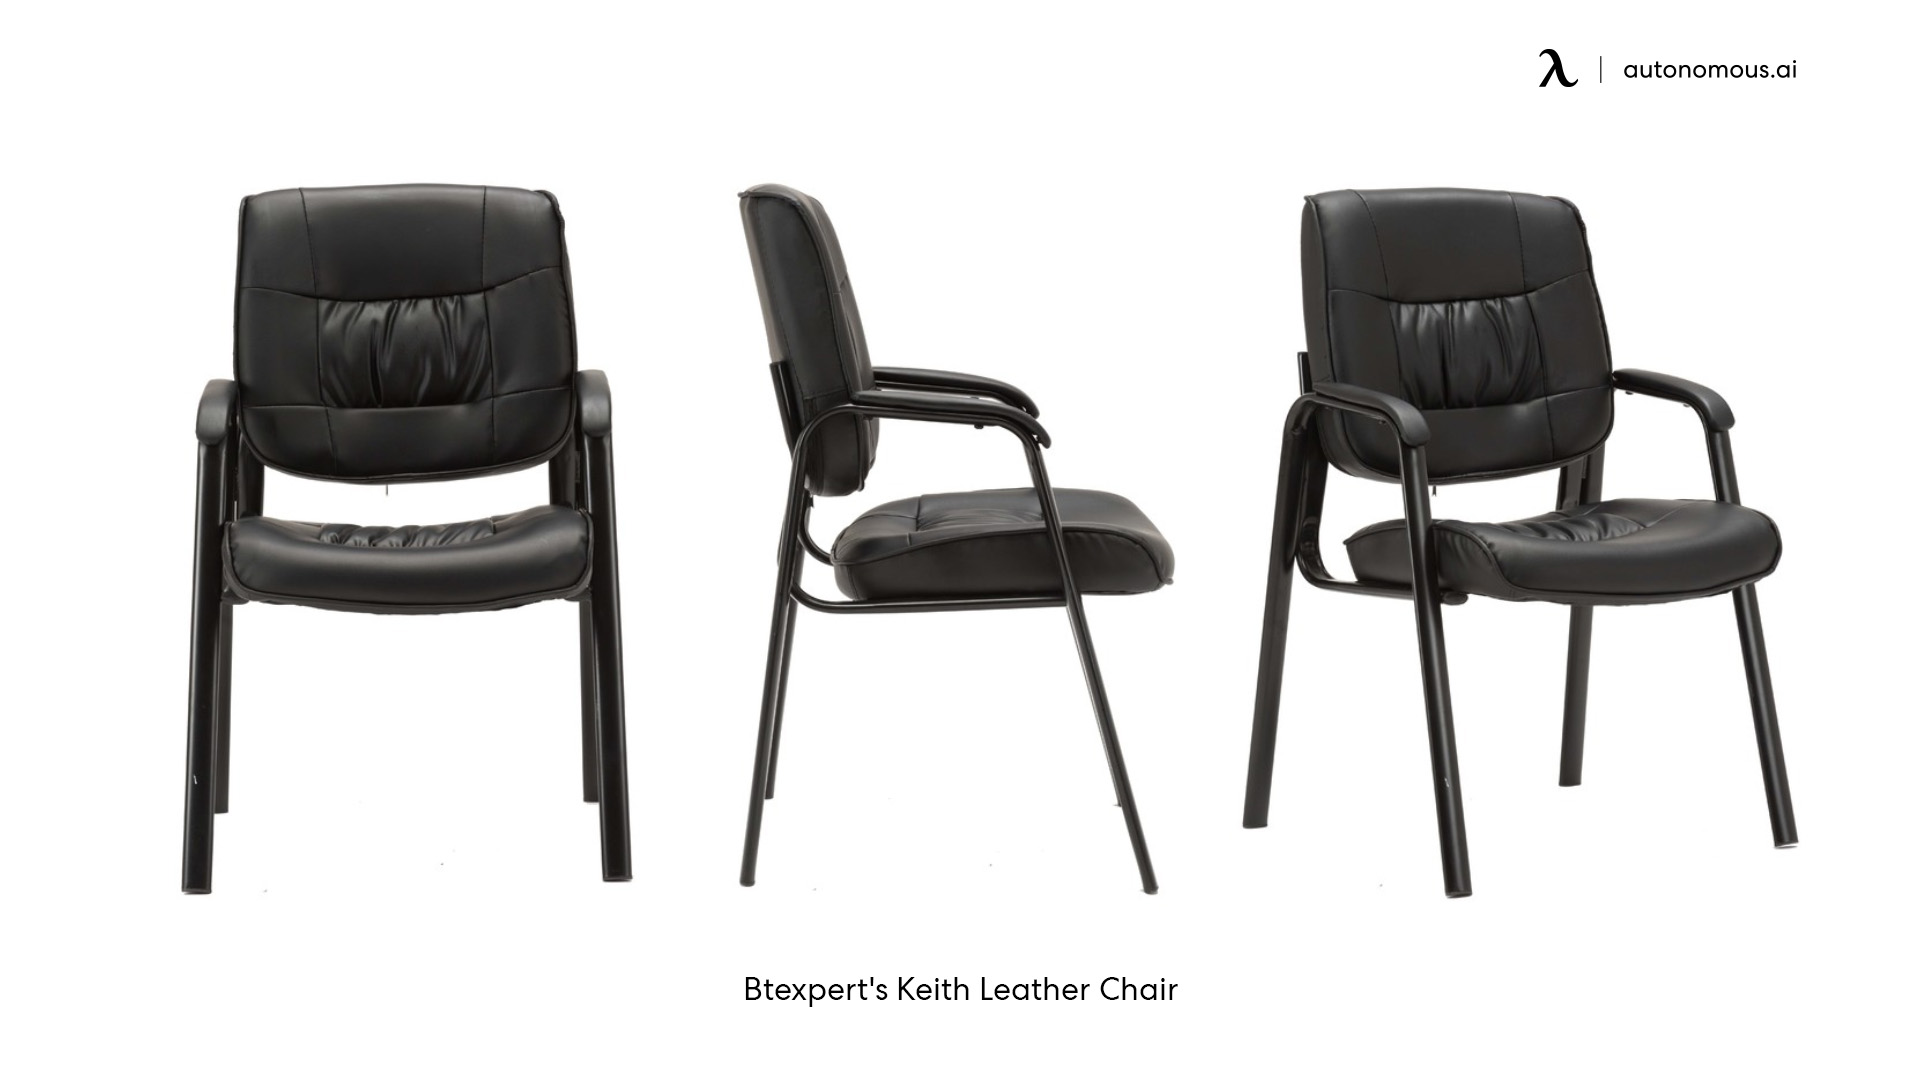 Btexpert's Keith Leather black office desk chair